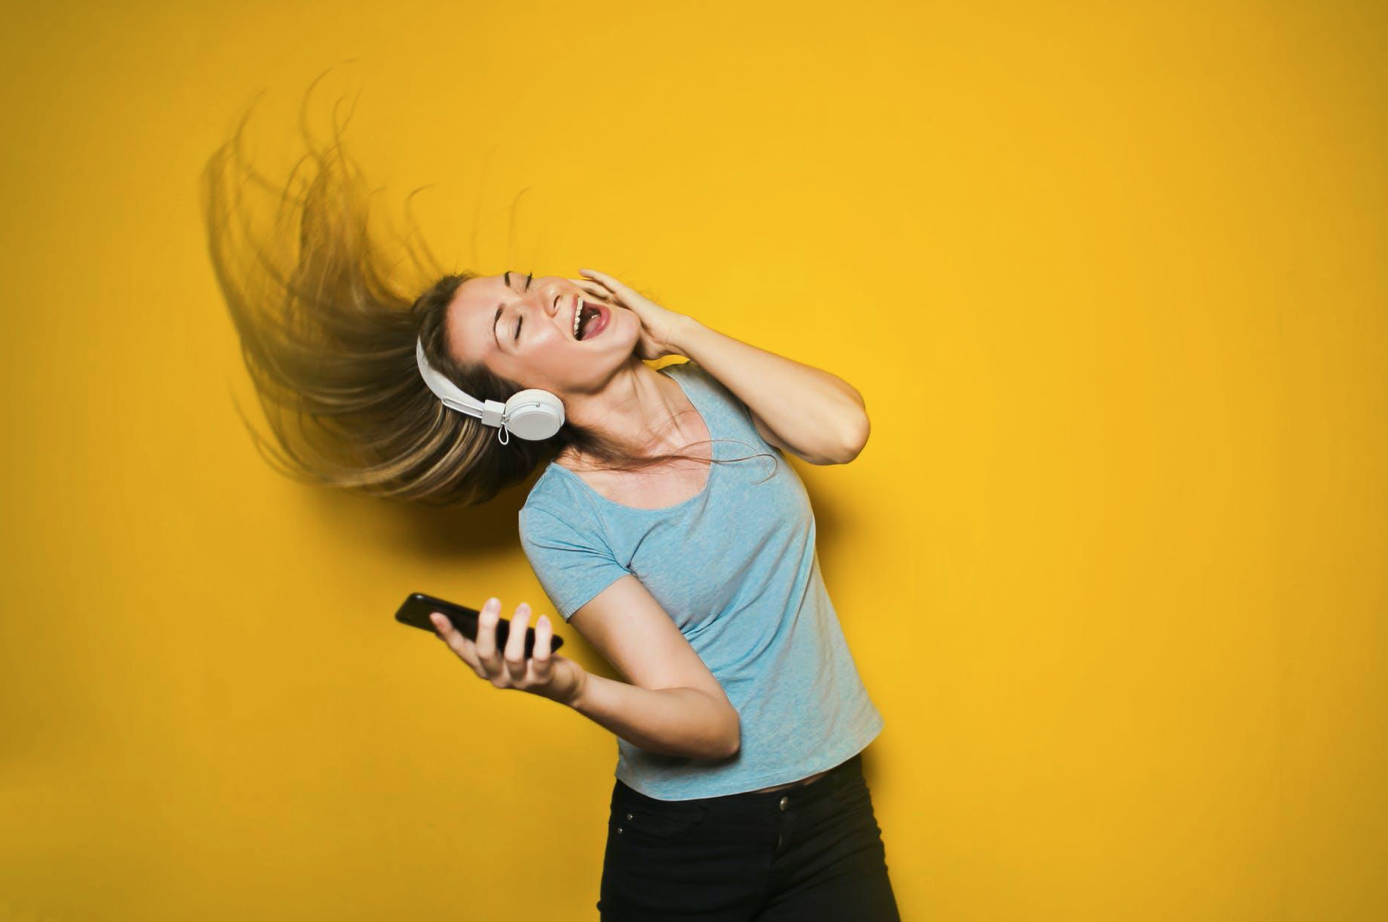 Woman listening to music against a yellow background; image by Andrea Piacquadio, via Pexels.com.